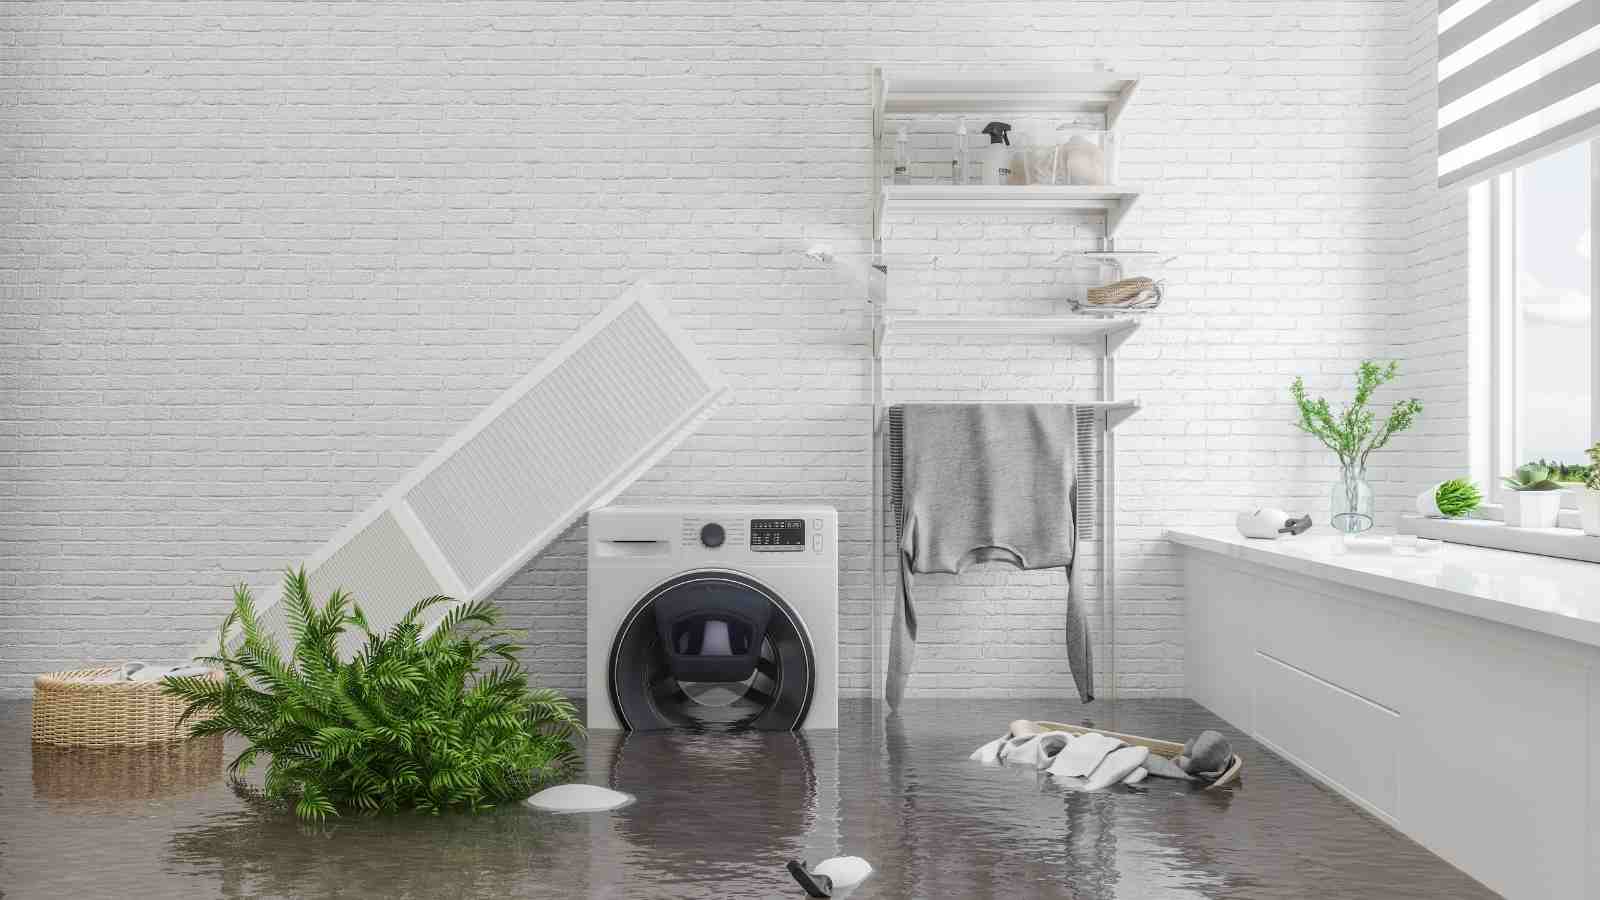 Immediate Steps To Take After Water Damage